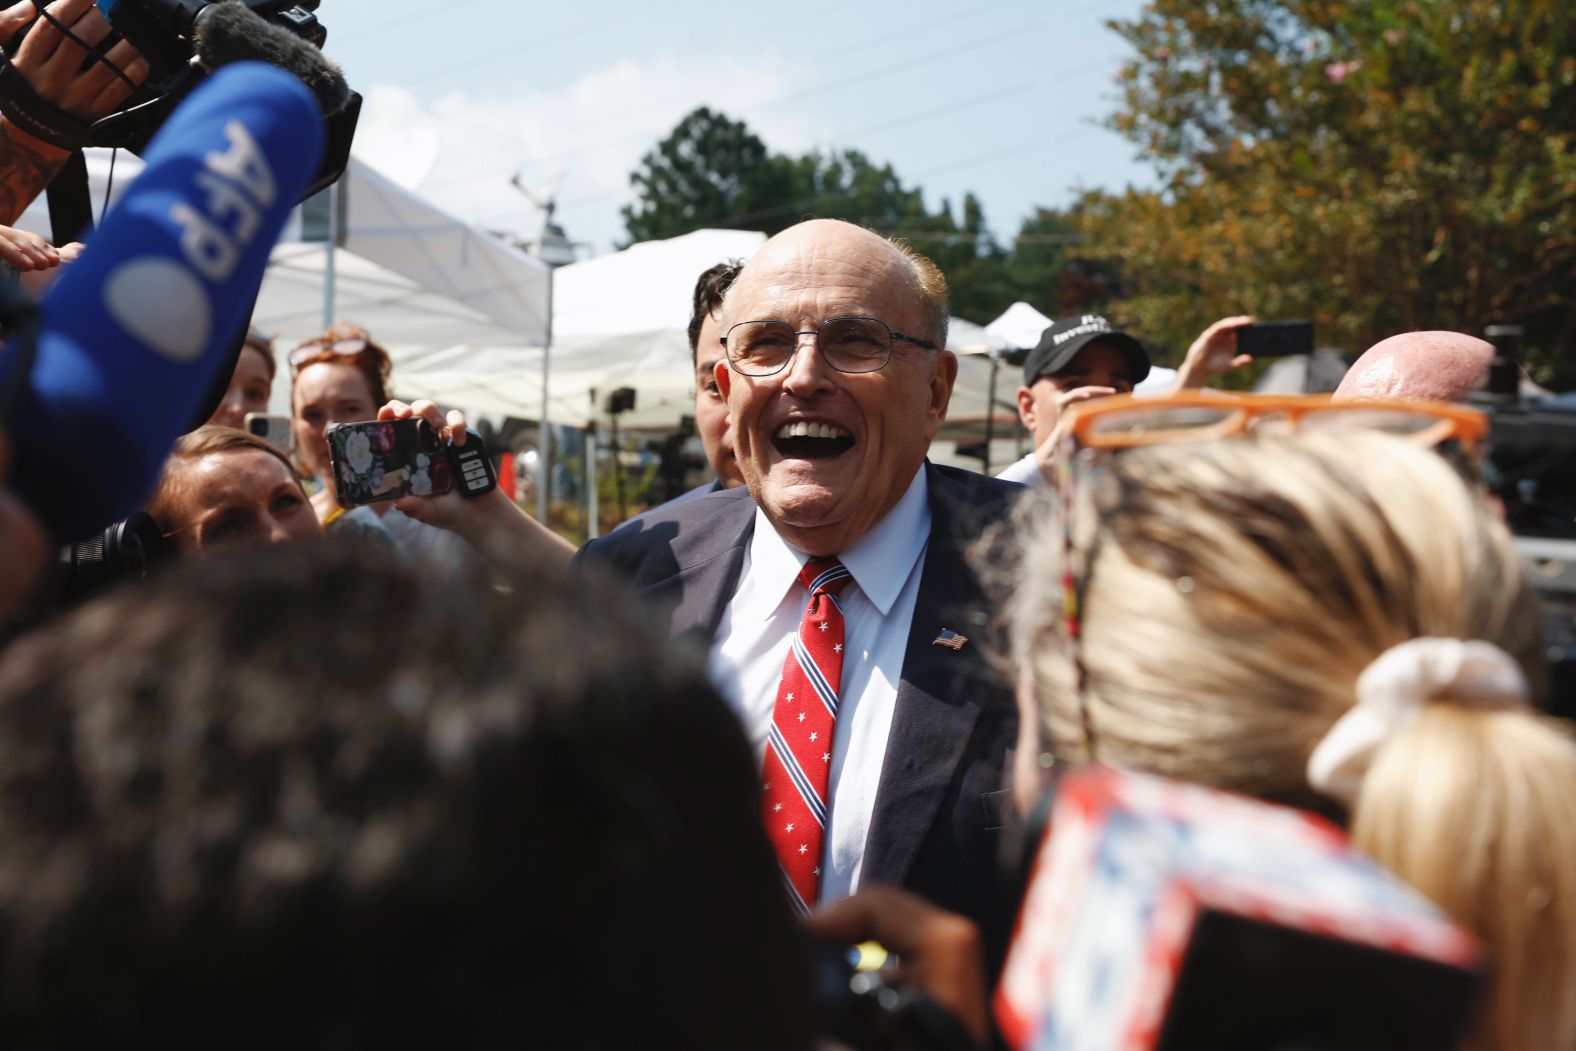 Rudy Giuliani, one of Donald Trump's most outspoken attorneys in 2020, <a href="index.php?page=&url=https%3A%2F%2Fwww.cnn.com%2F2023%2F08%2F23%2Fpolitics%2Fgiuliani-fulton-county%2Findex.html" target="_blank">speaks to reporters</a> outside the jail after he was booked on Wednesday, August 23.